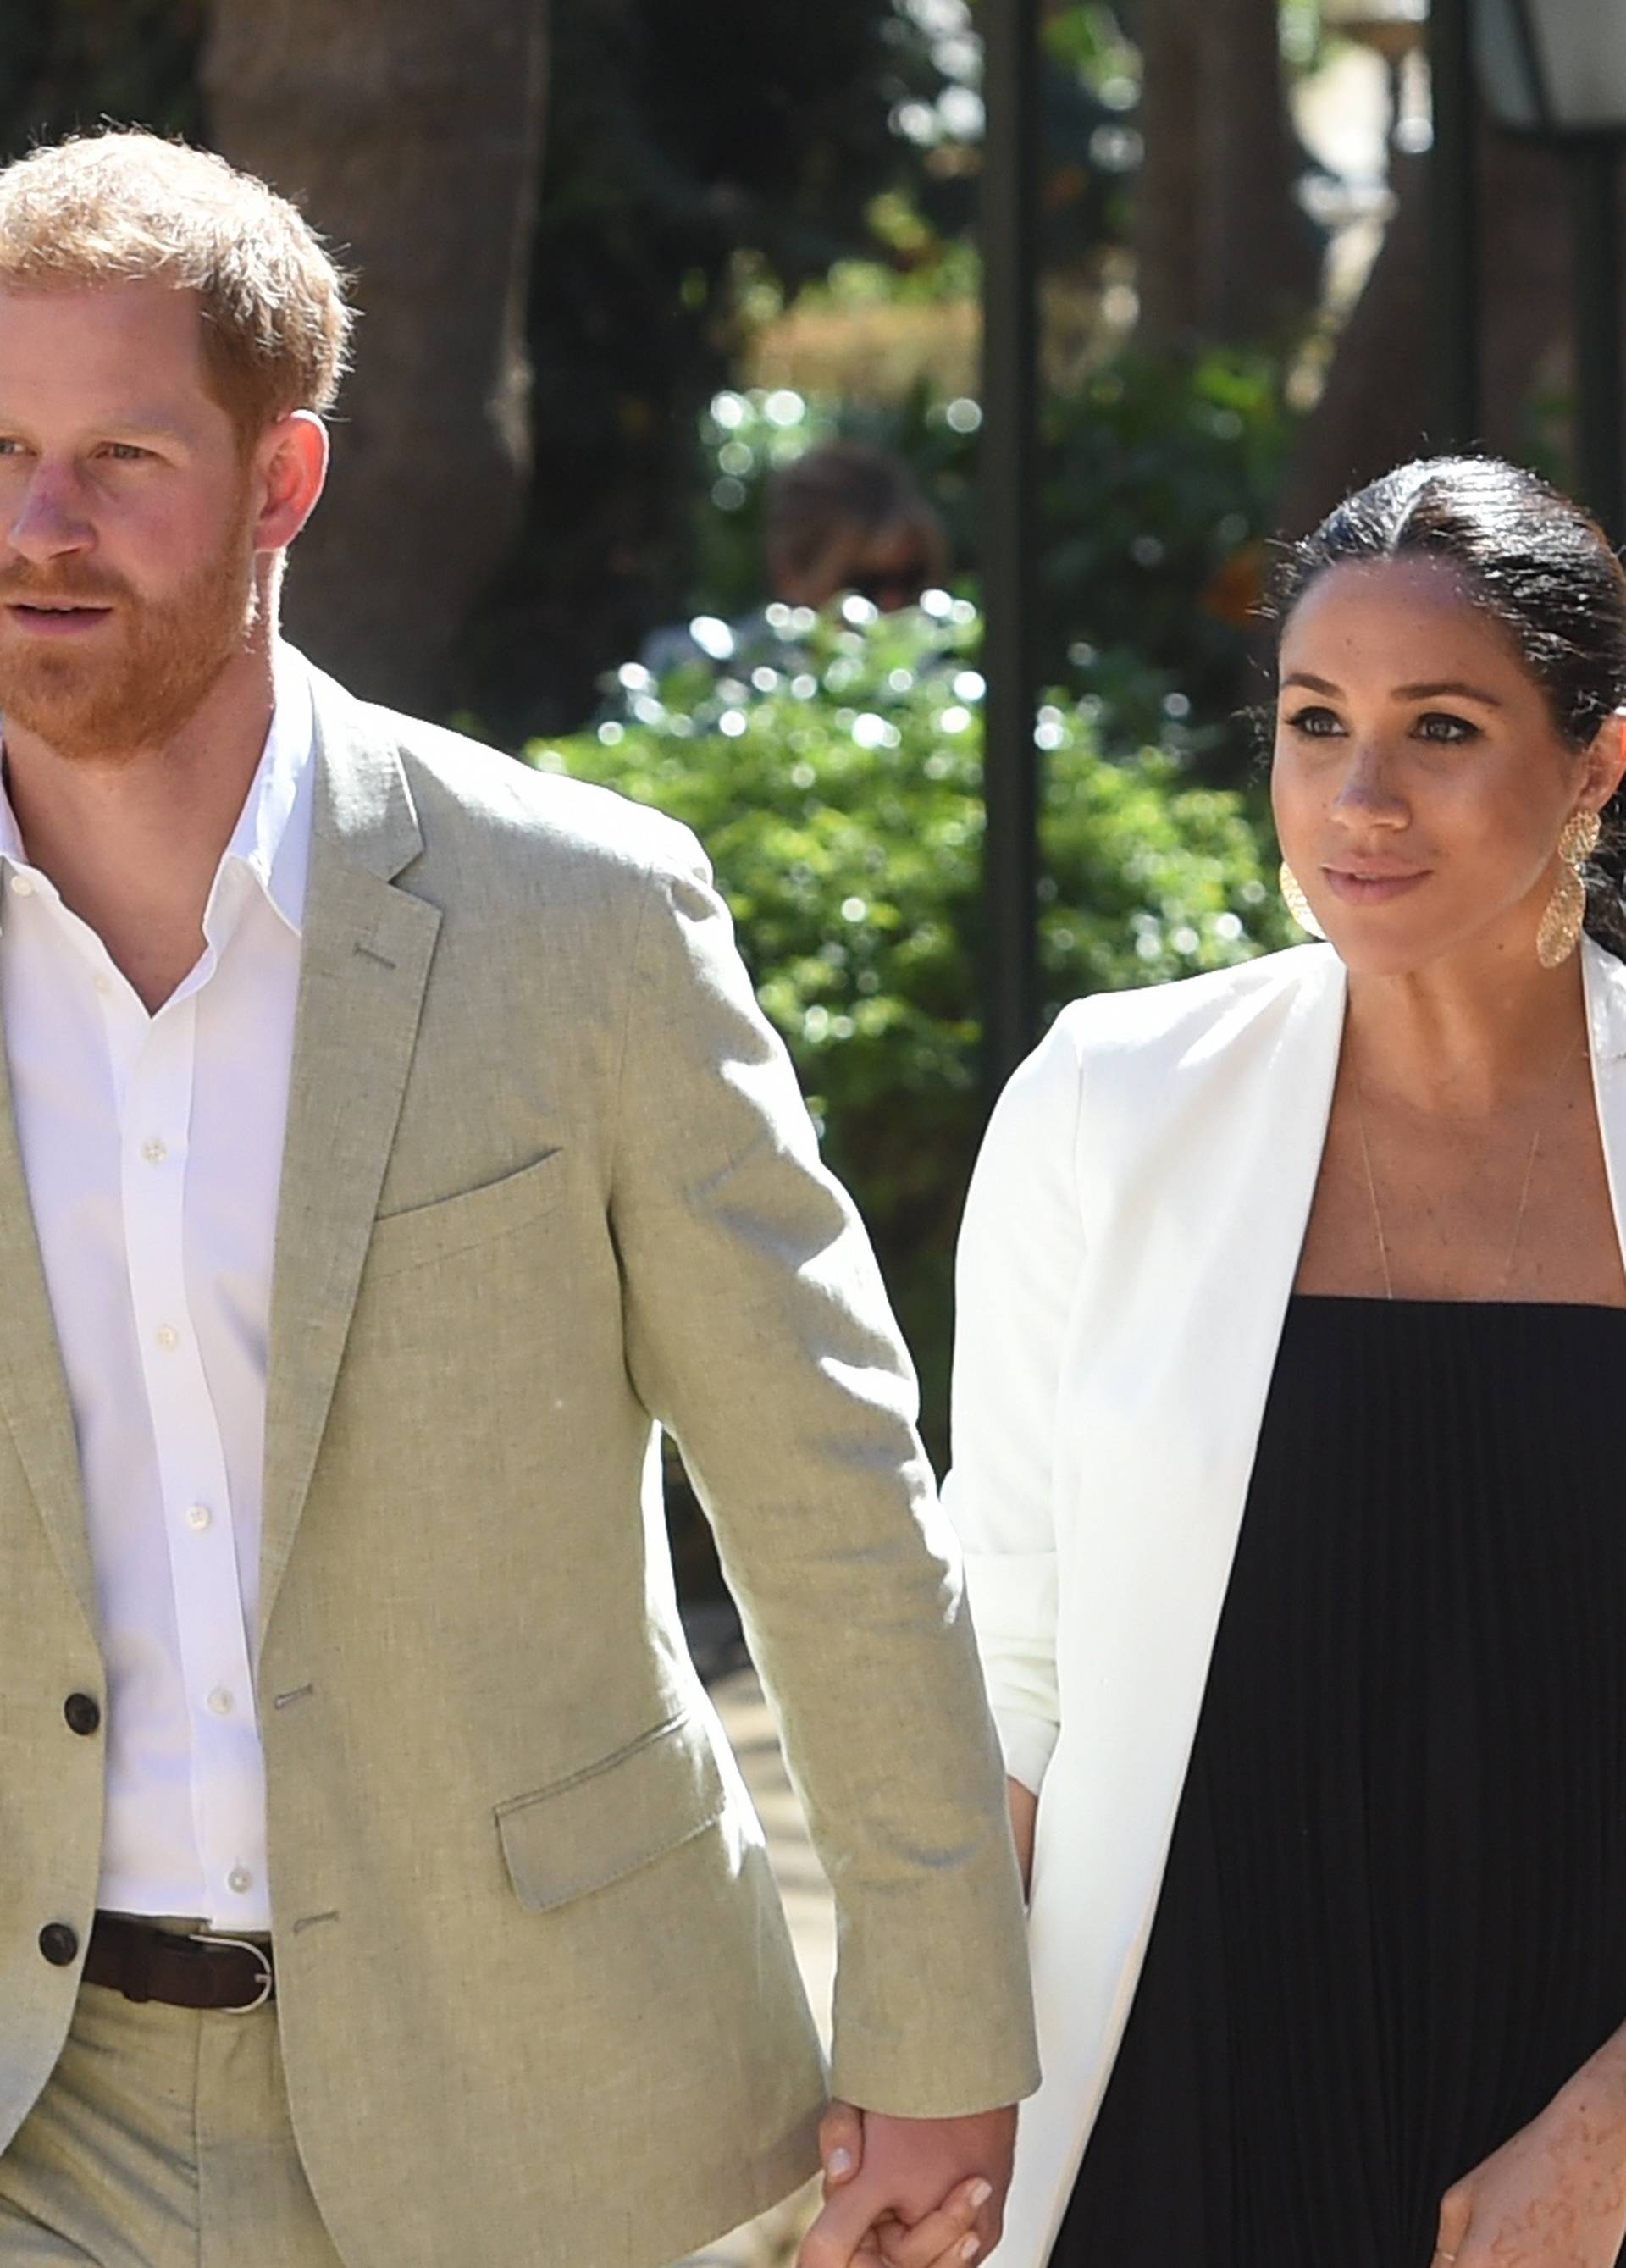 Duke and Duchess of Sussex visit to Morocco - Day 3